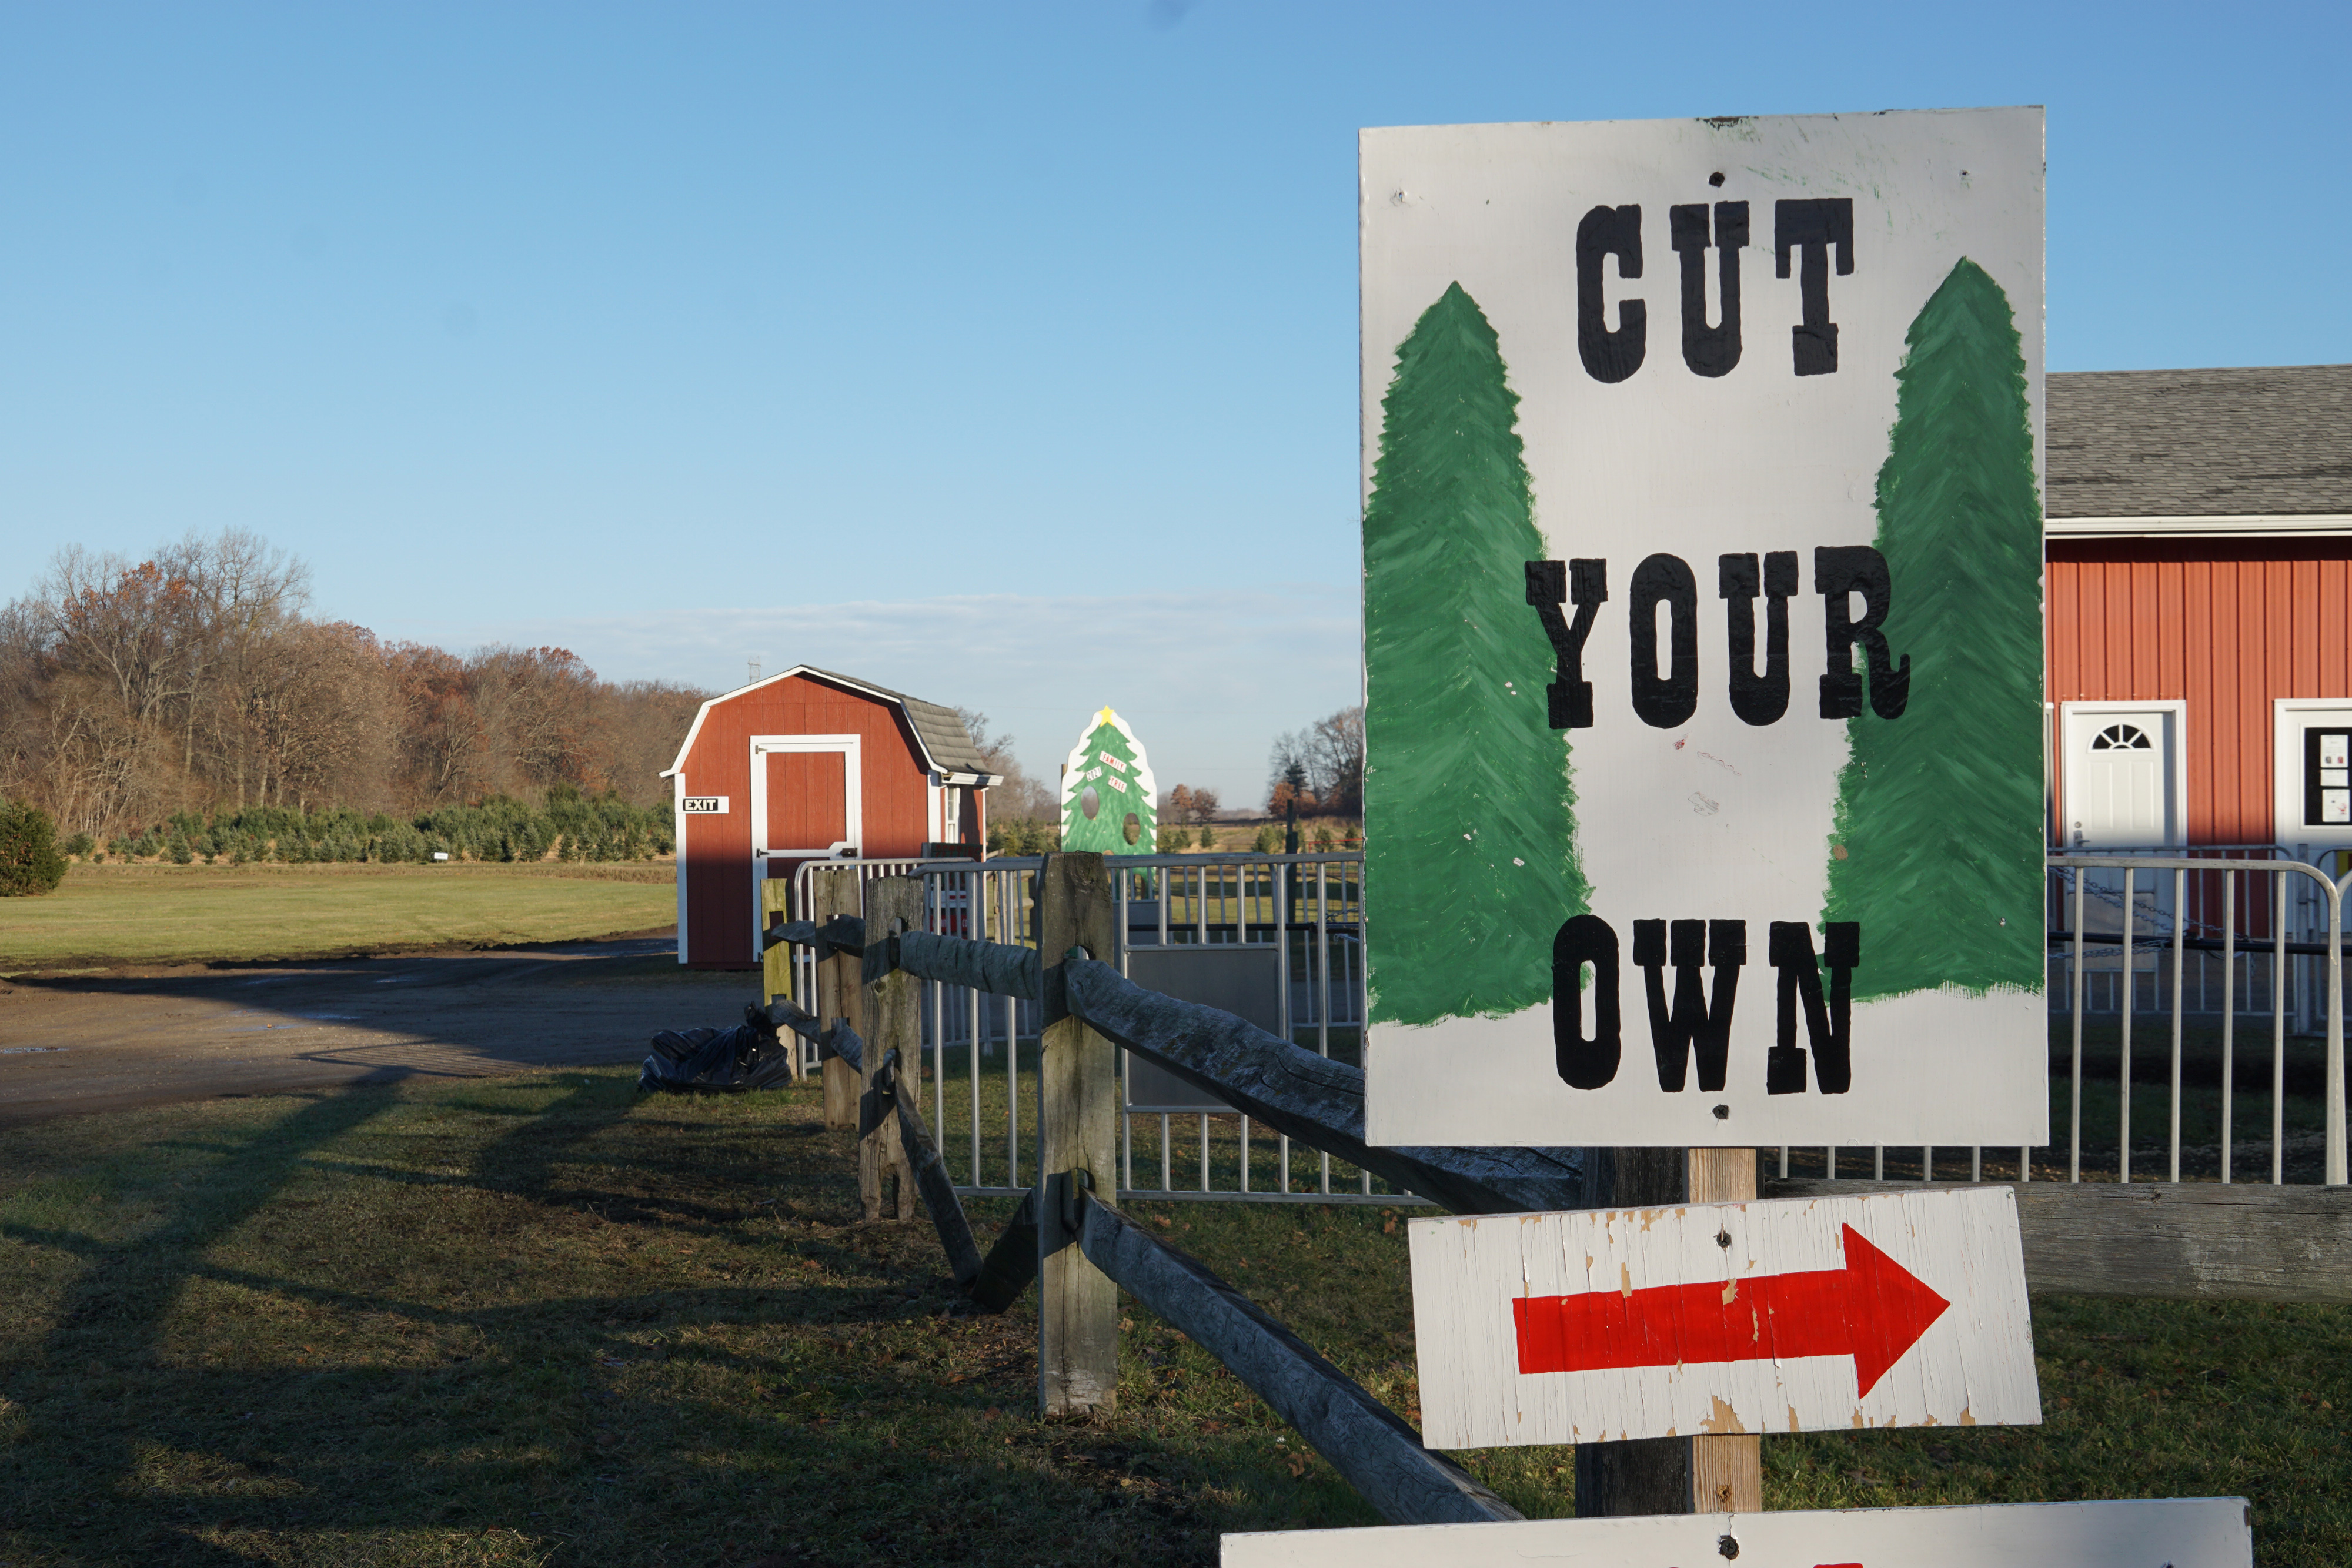 Sign saying cut your own with red directional arrow pointing right